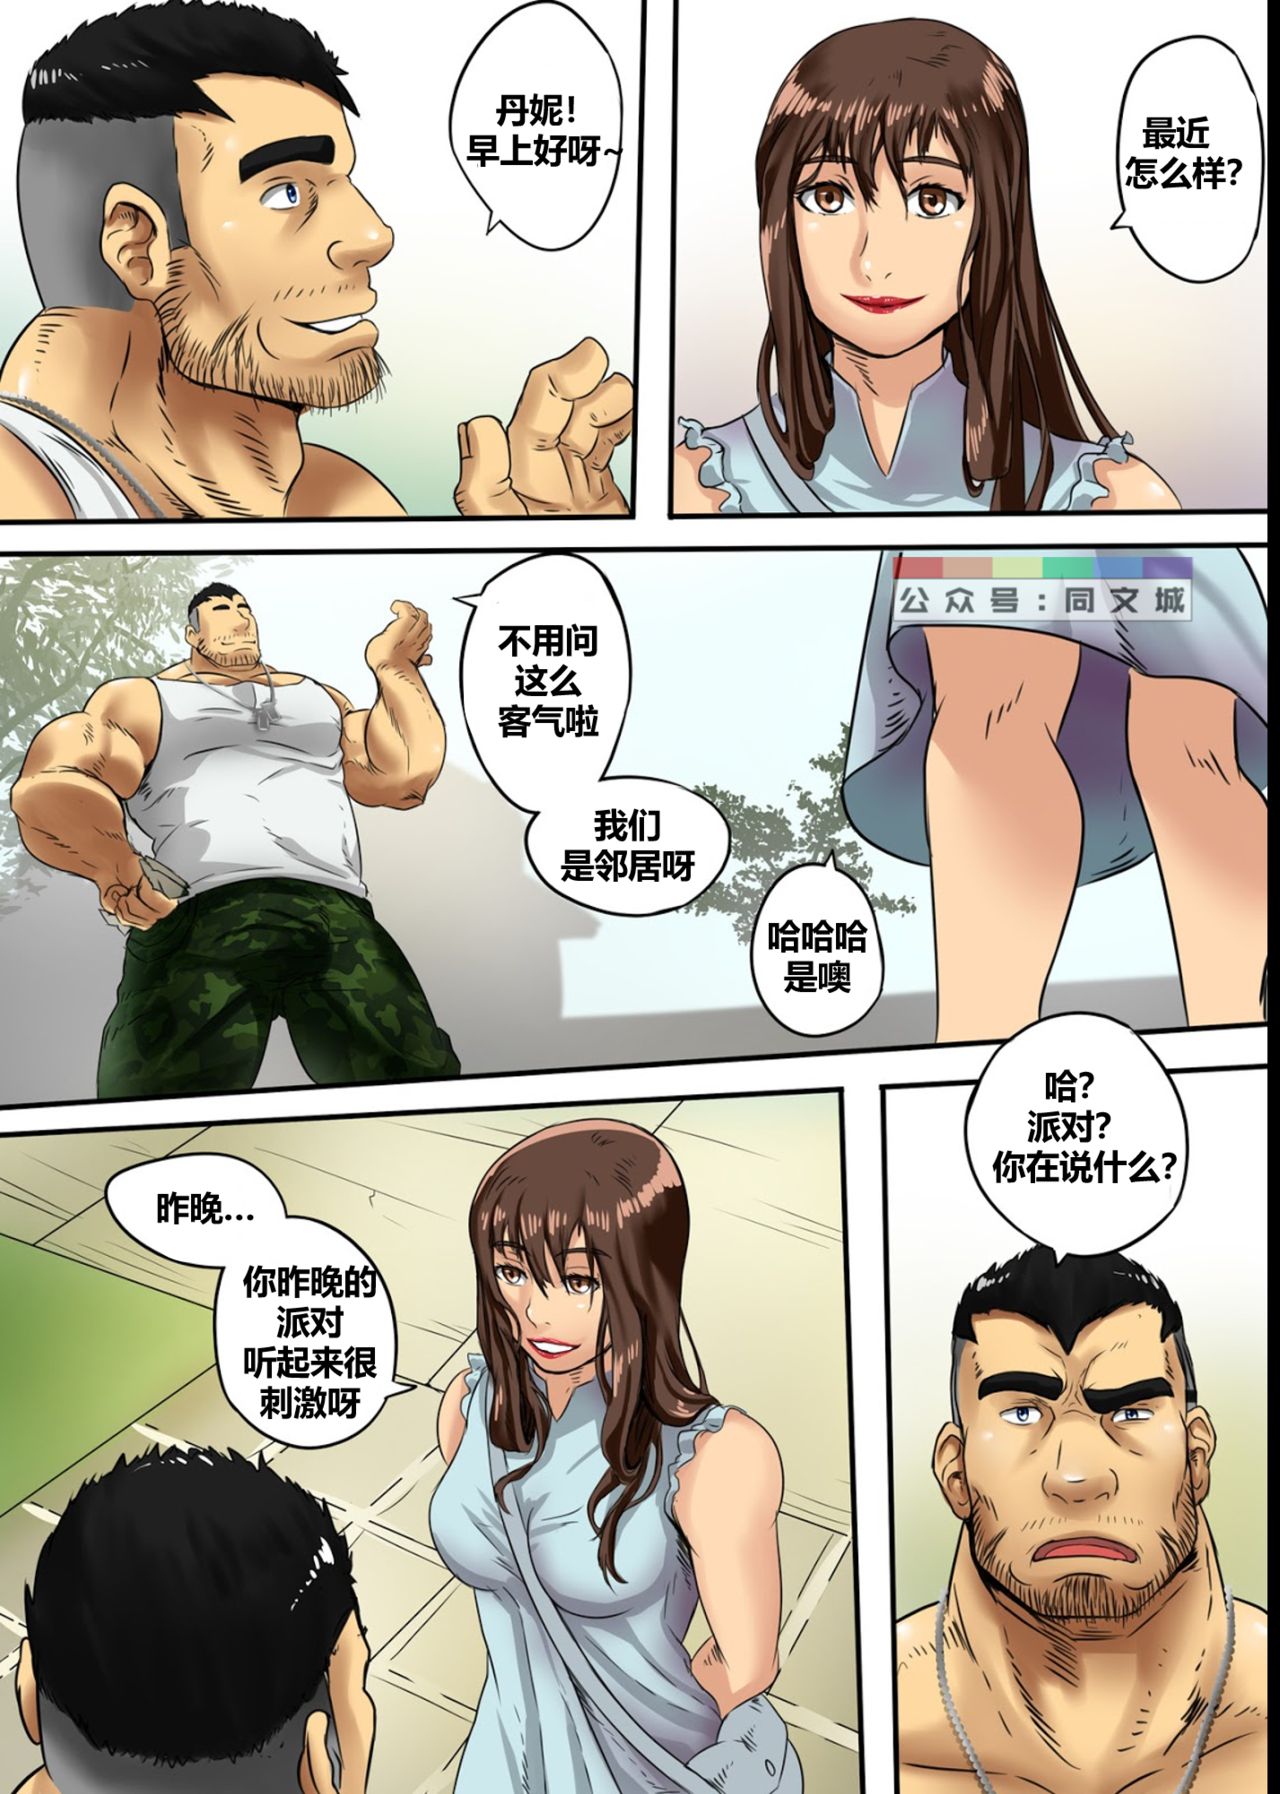 Zoroj – My Life With A Orc 3 Party (Chinese) page 2 full